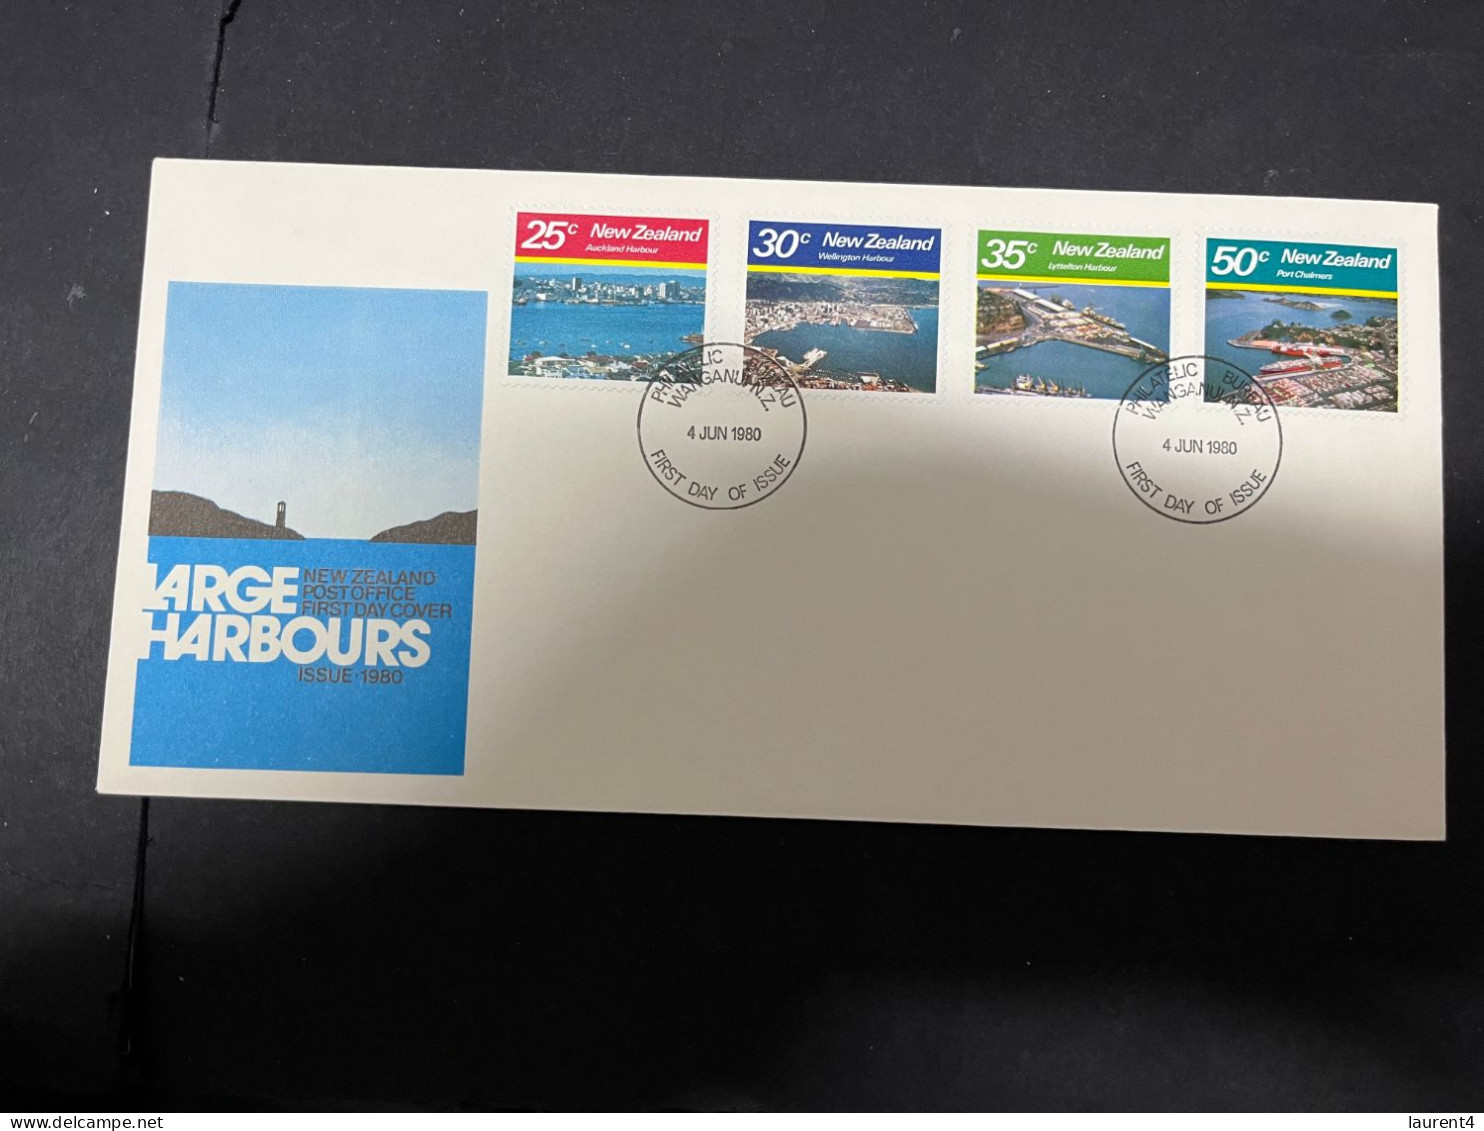 9-5-2024 (4 Z 34) New Zealand FDC - 1980 - Large Harbours - FDC